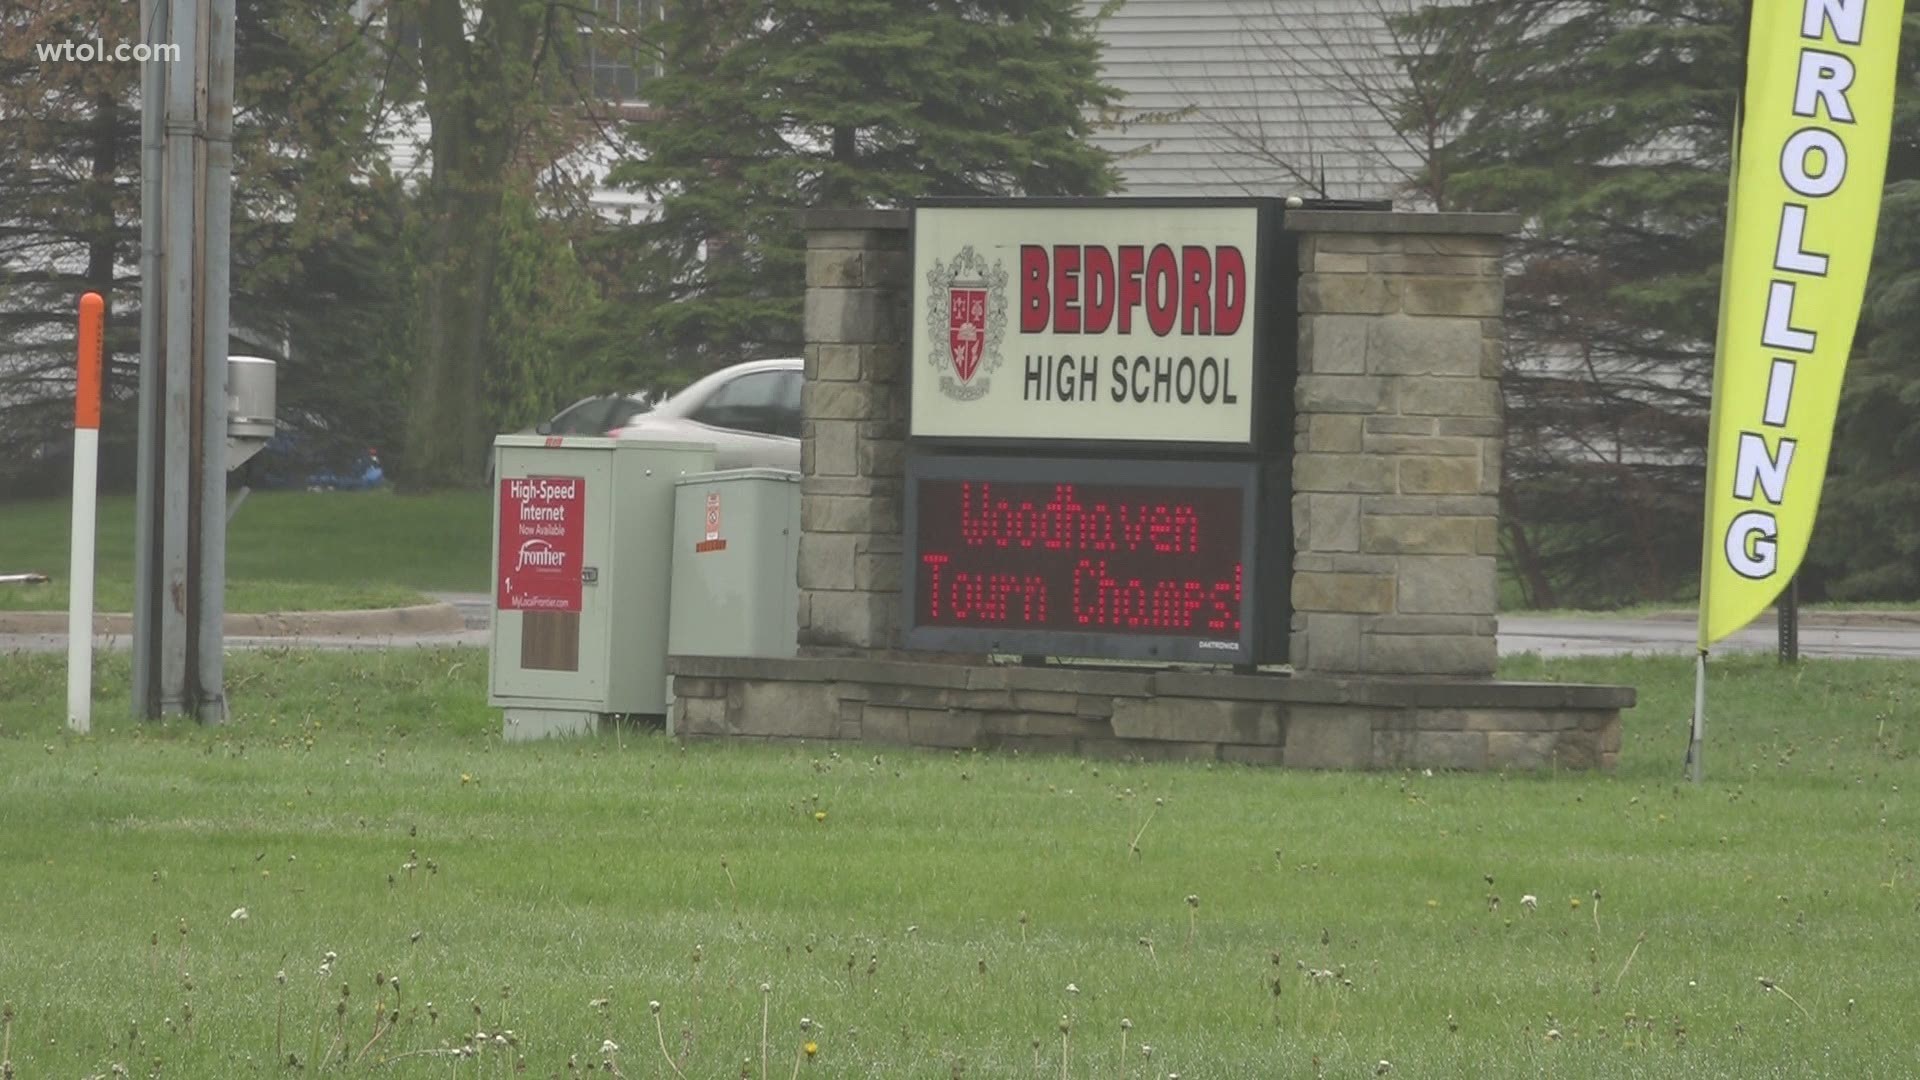 Bedford Public Schools is asking their residents to vote "yes" in the upcoming election. The superintendent says it won't cost any more than what they're paying now.